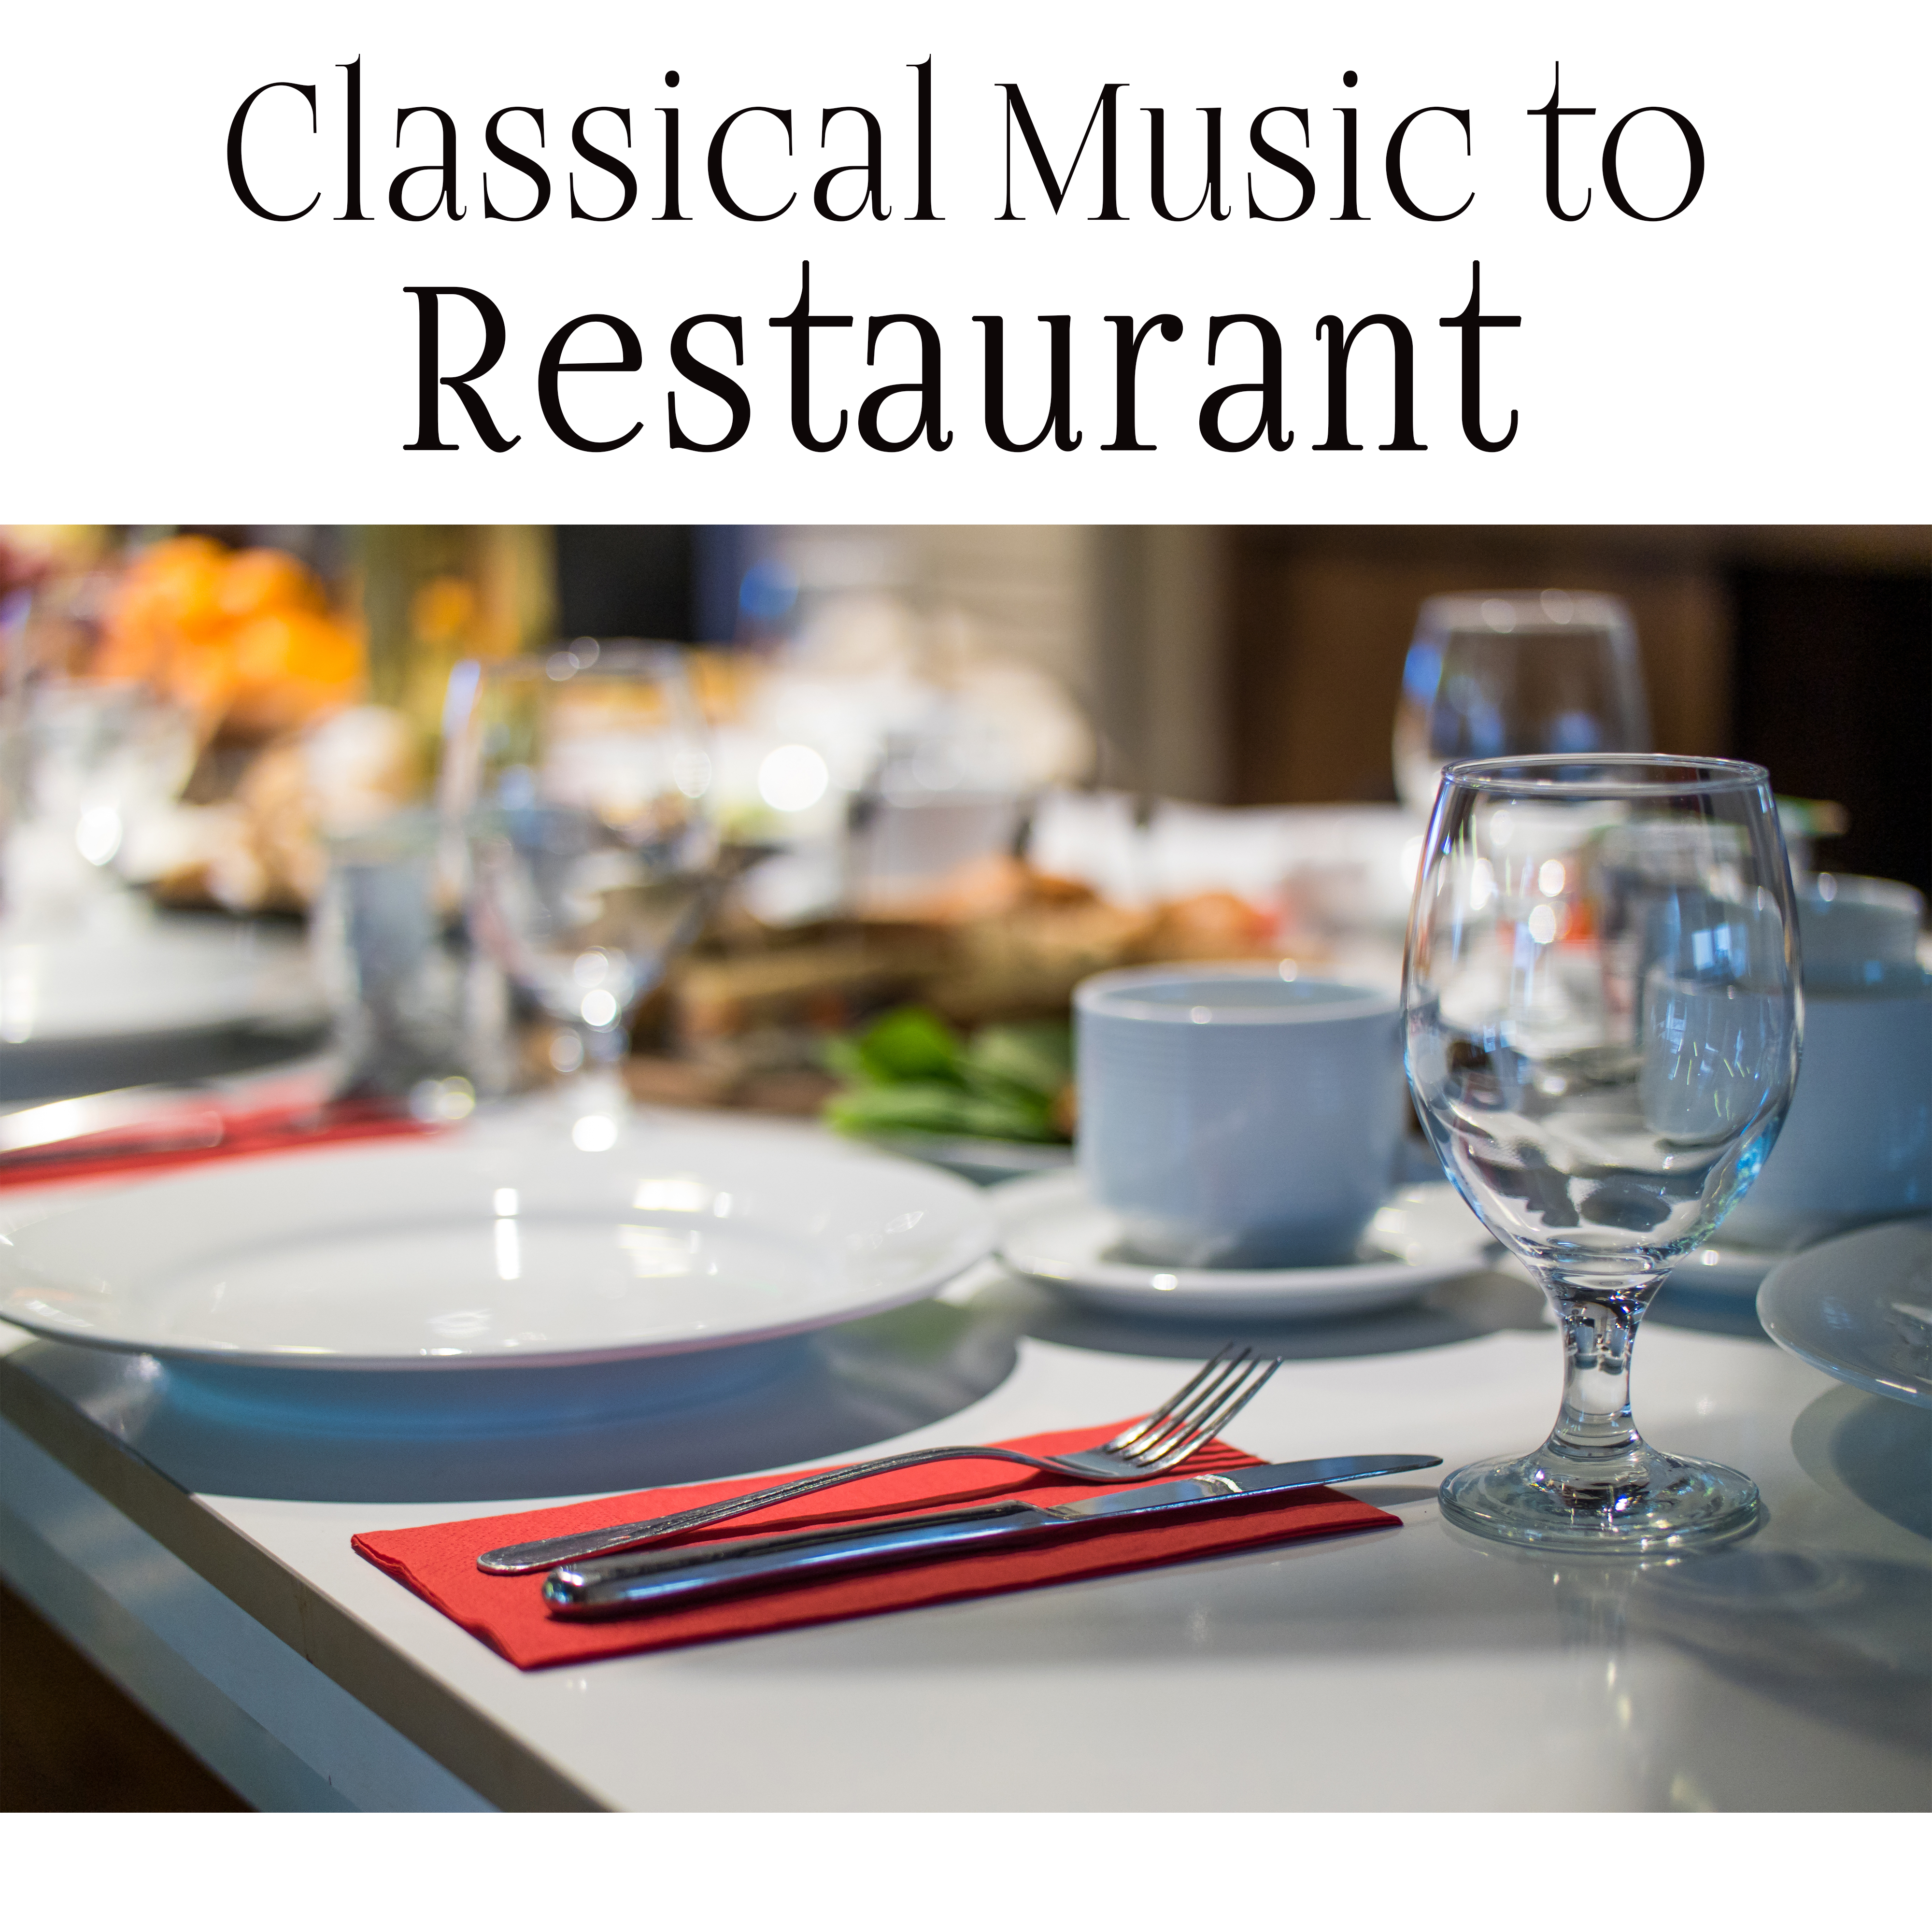 Classical Music to Restaurant